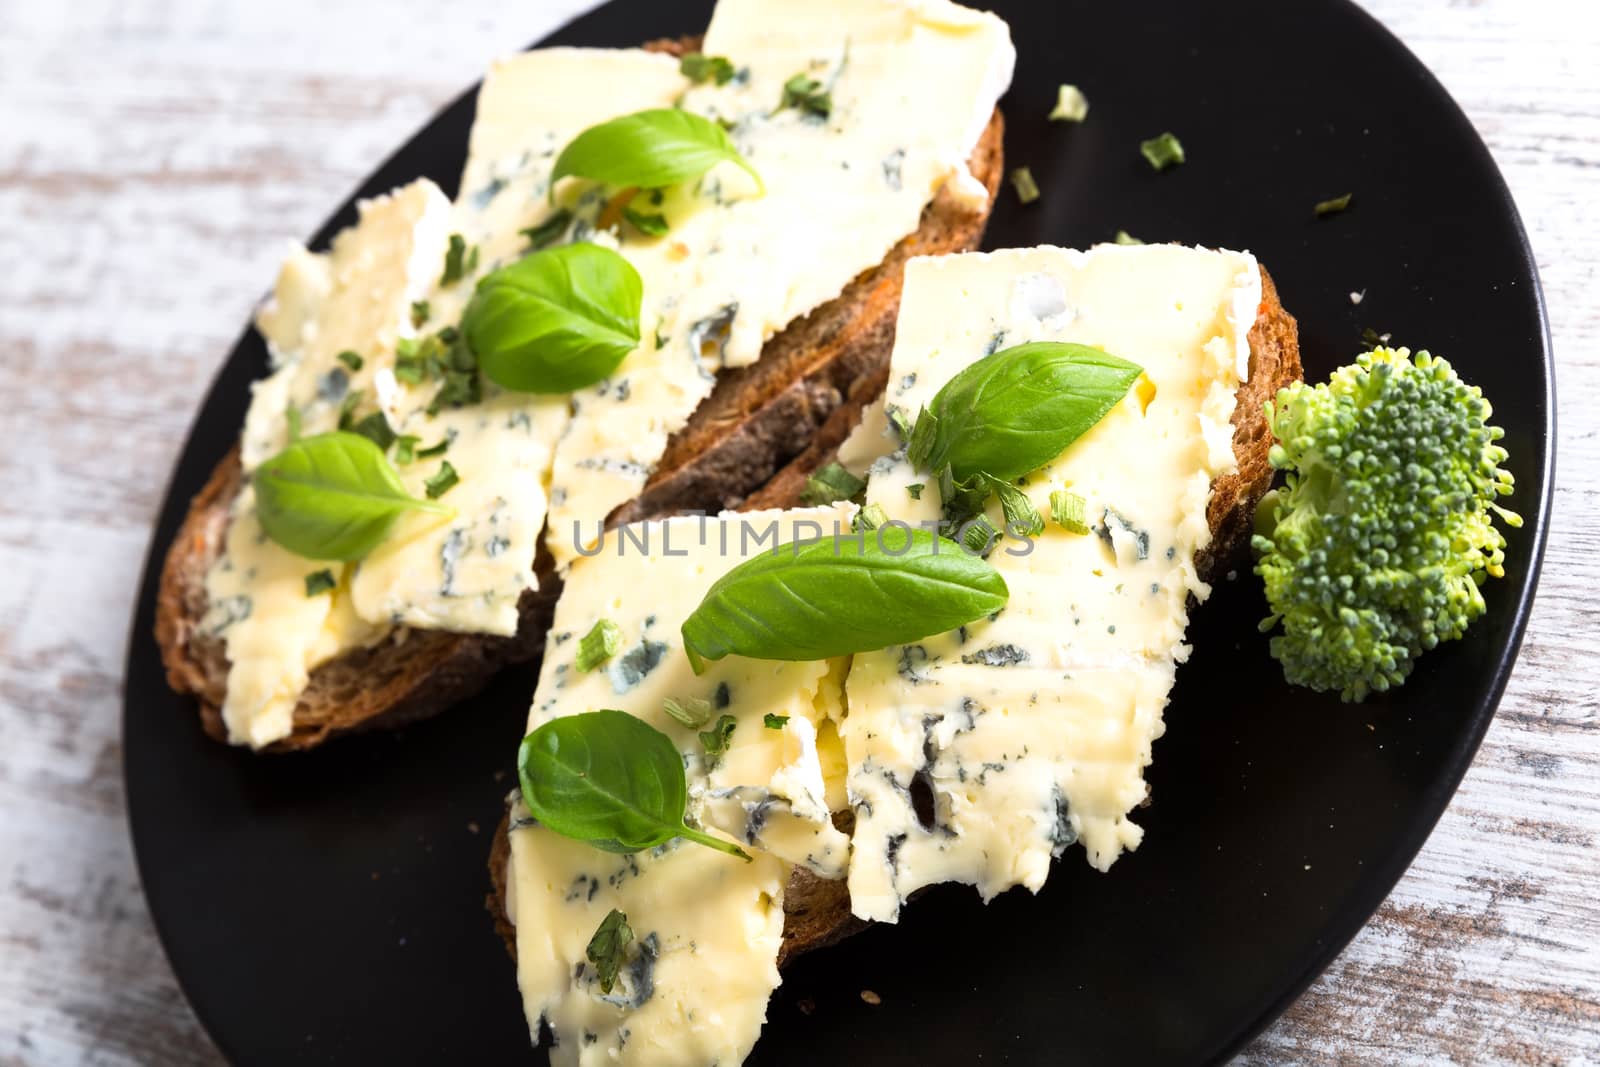 Sandwiches with Roquefort cheese	 by Spectral